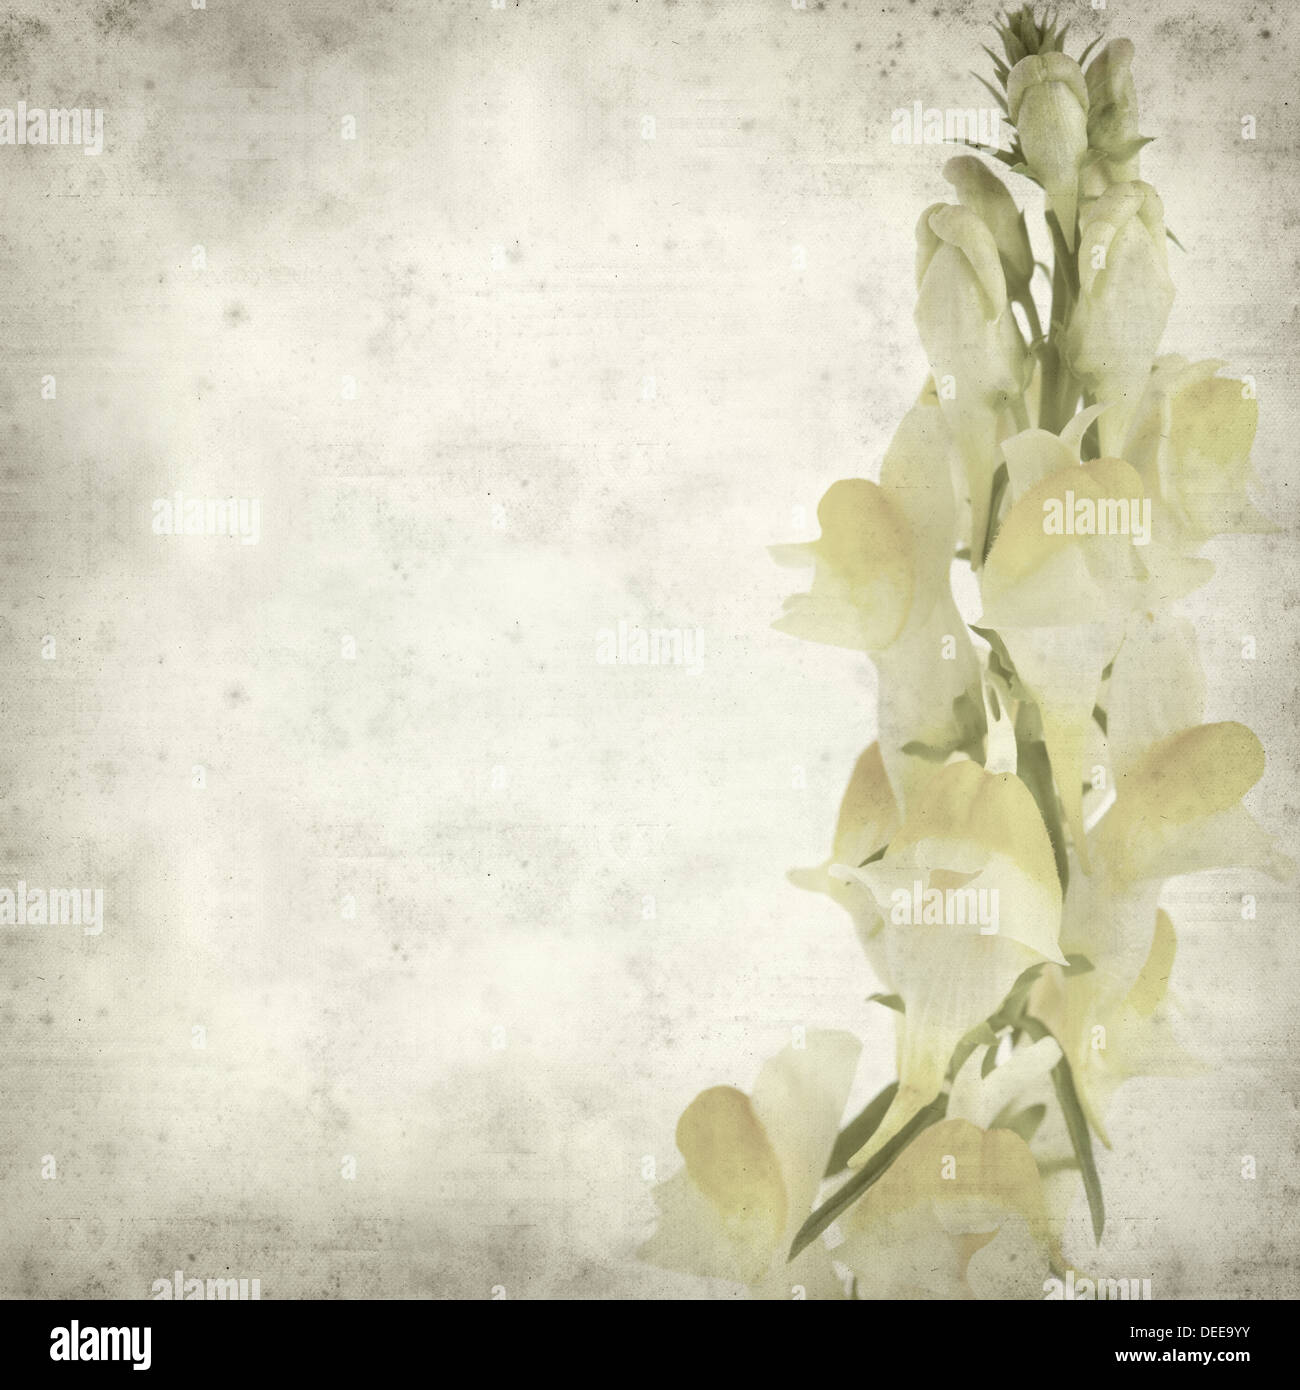 textured old paper background with yellow toadflax flower Stock Photo